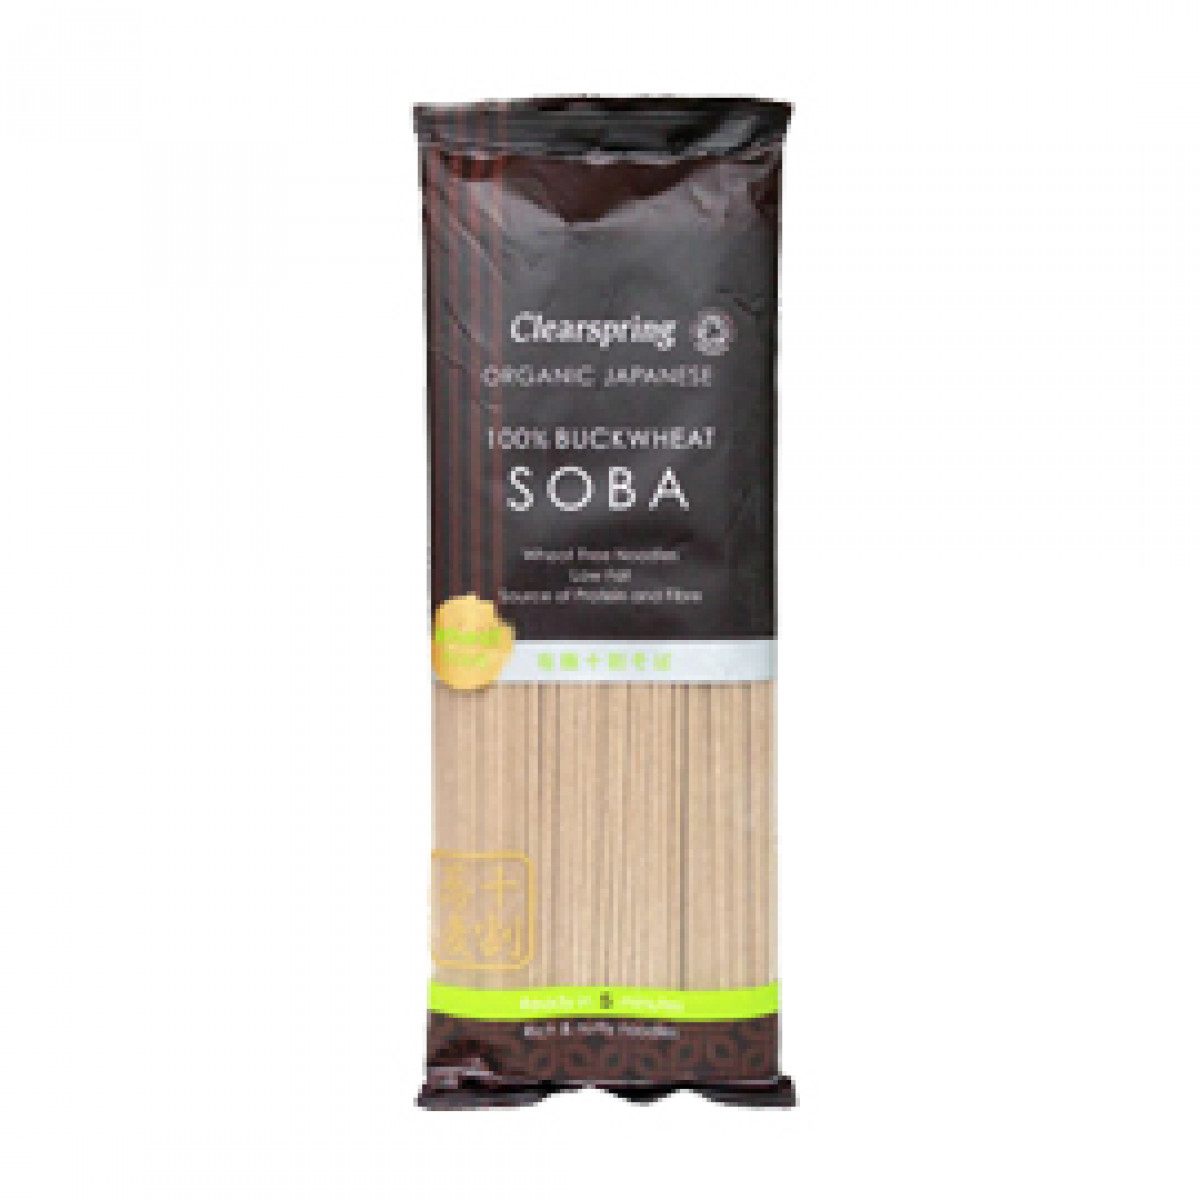 Product picture for Soba Noodles - 100% Buckwheat